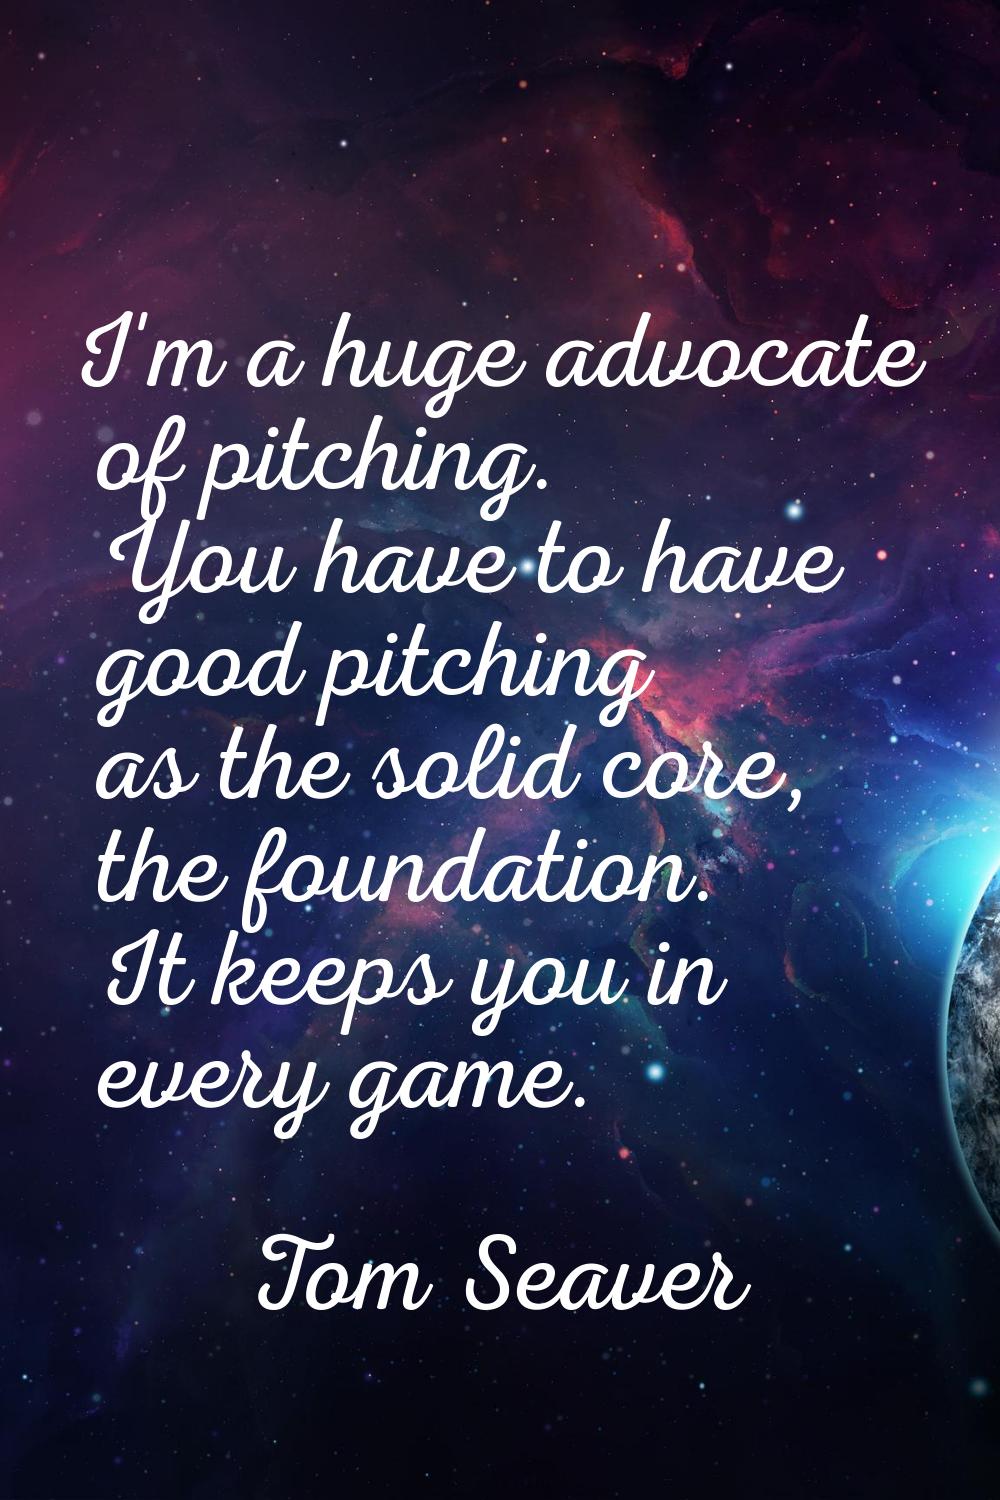 I'm a huge advocate of pitching. You have to have good pitching as the solid core, the foundation. 